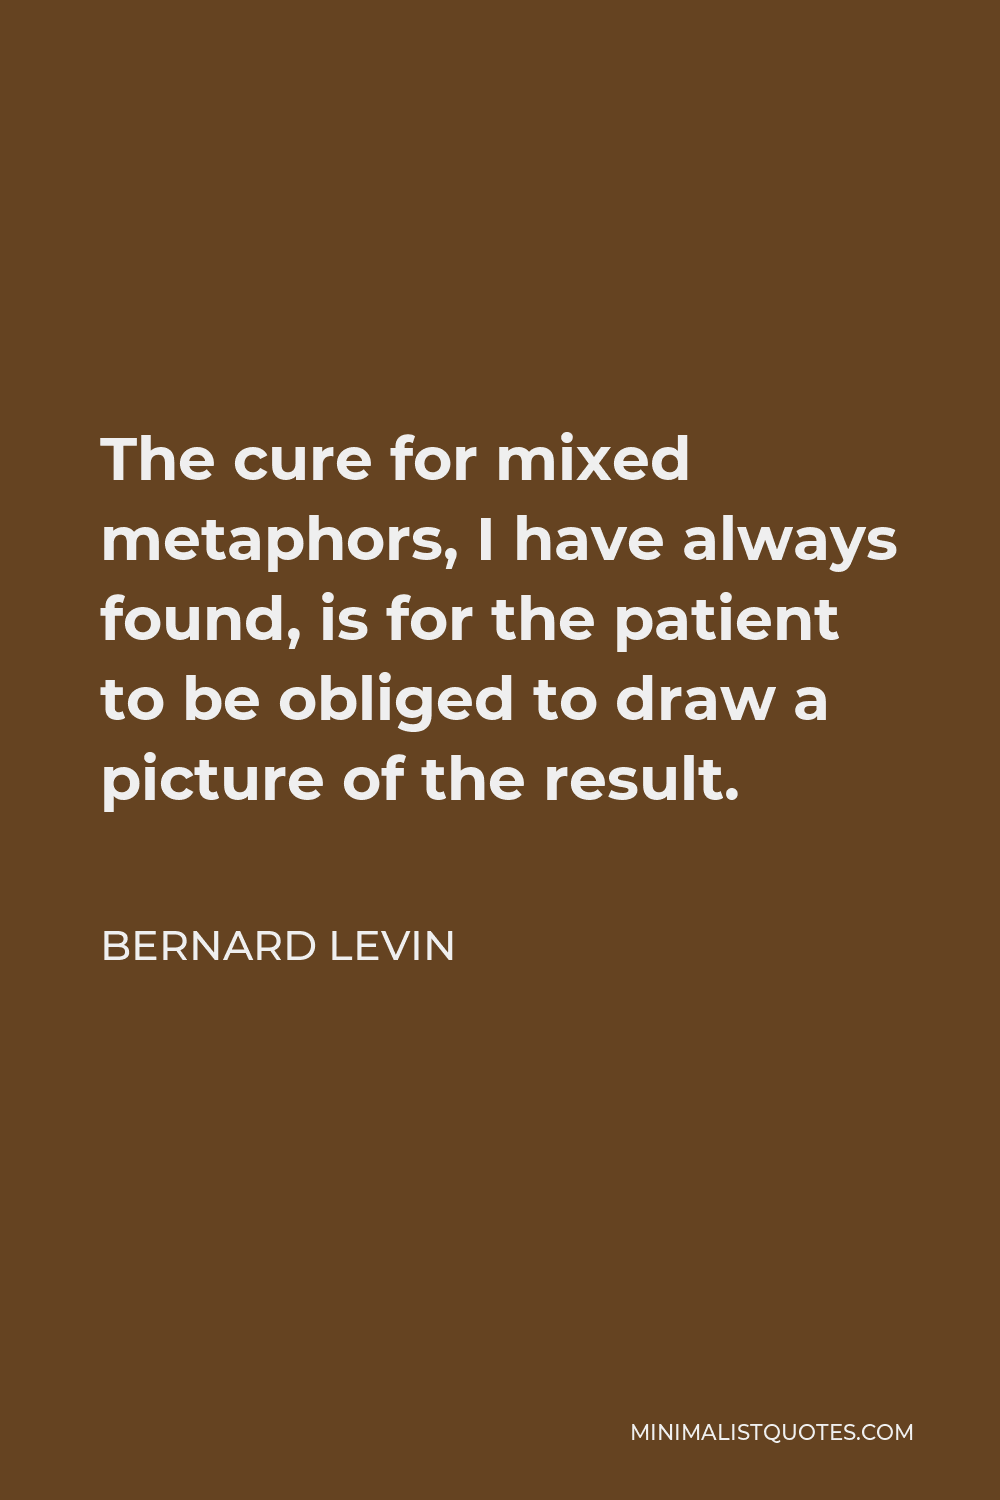 Bernard Levin Quote - The cure for mixed metaphors, I have always found, is for the patient to be obliged to draw a picture of the result.